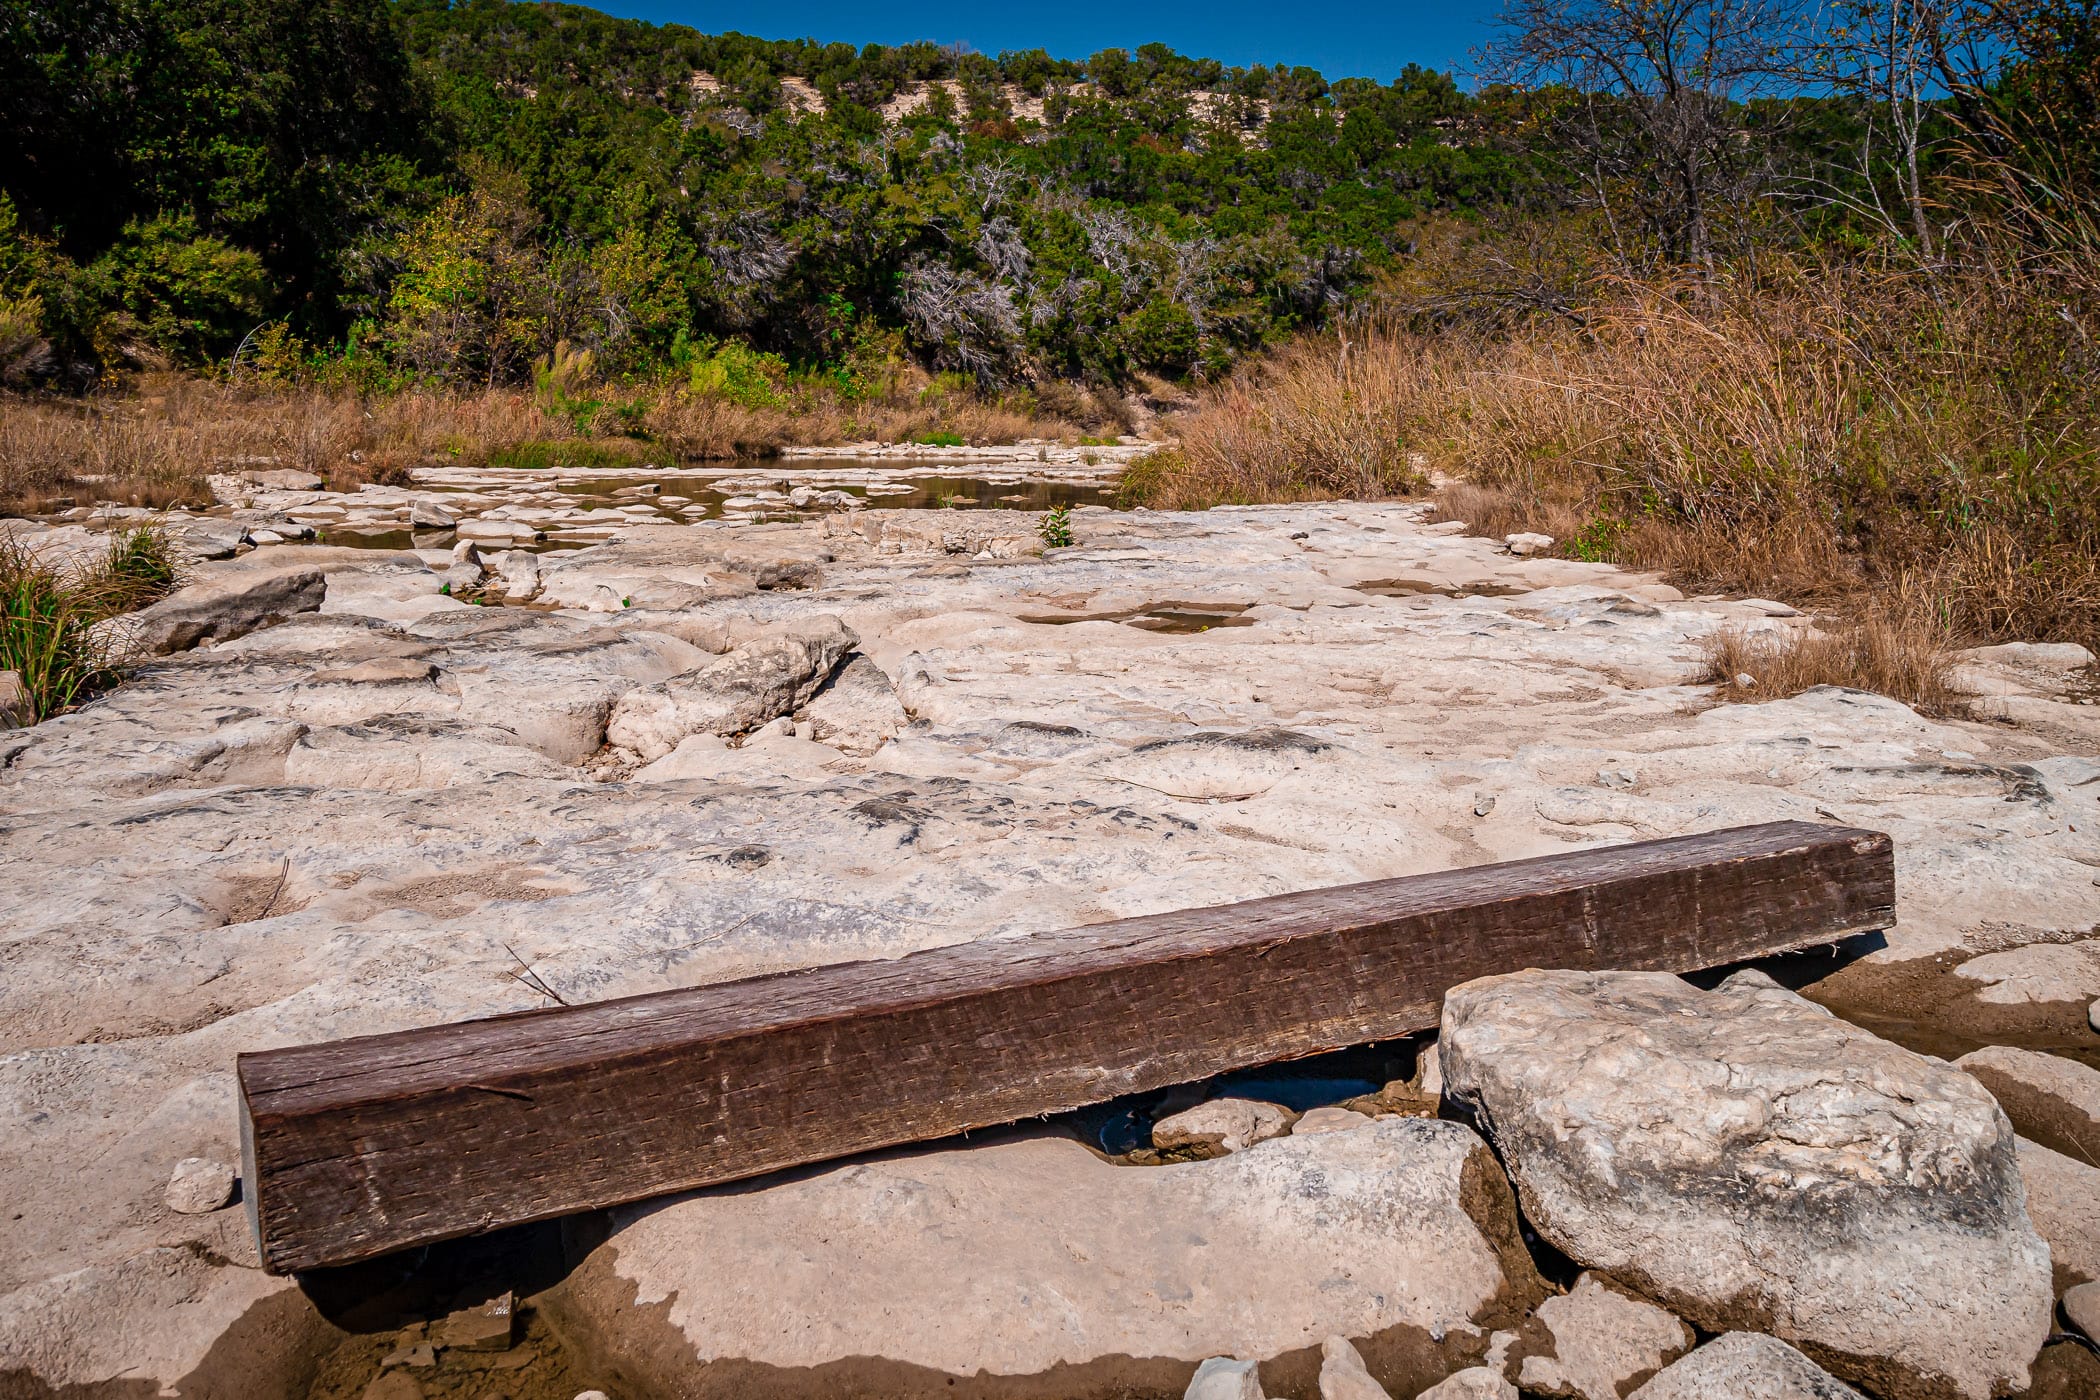 A wooden beam lies in the nearly-dry Paluxy River at Texas' Dinosaur Valley State Park.